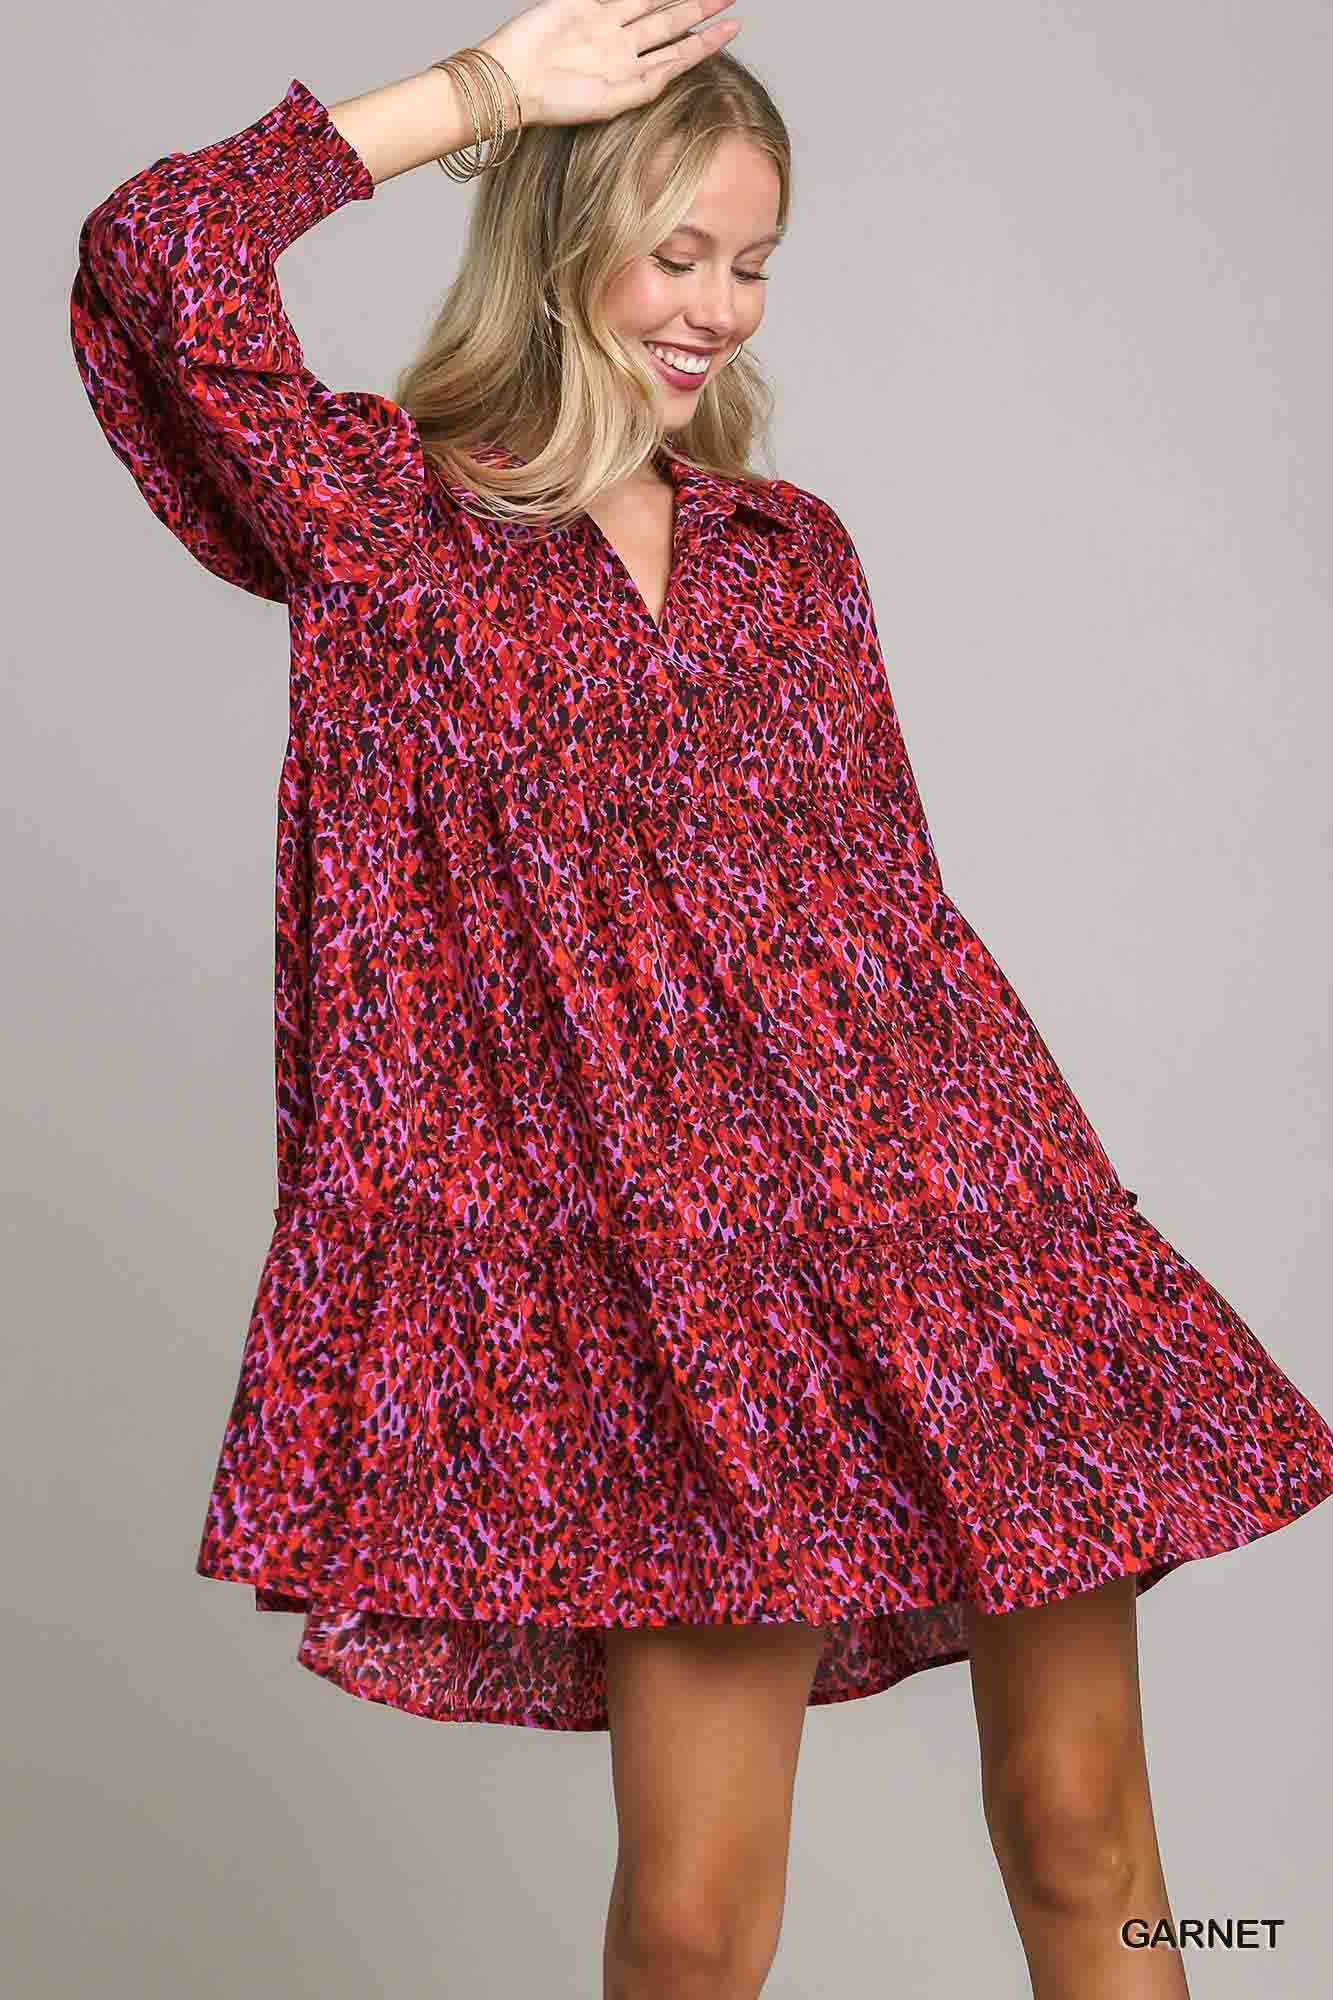 Mixed Print LSL Dress with Ruffle Trim in Garnet by Umgee